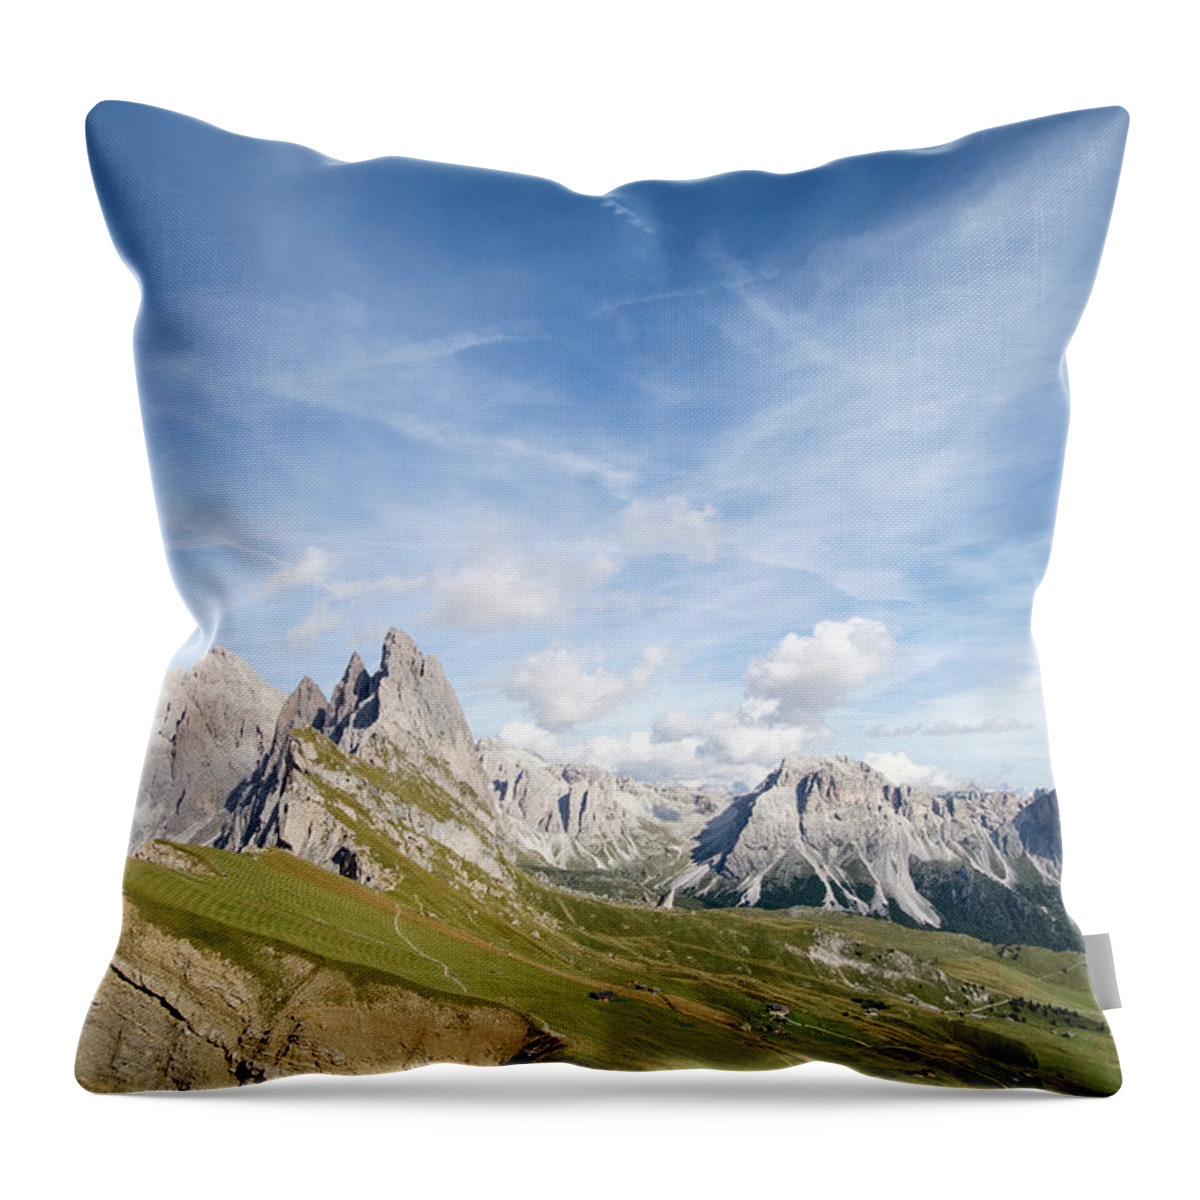 Italy Throw Pillow featuring the photograph Odle #2 by Alberto Zanoni